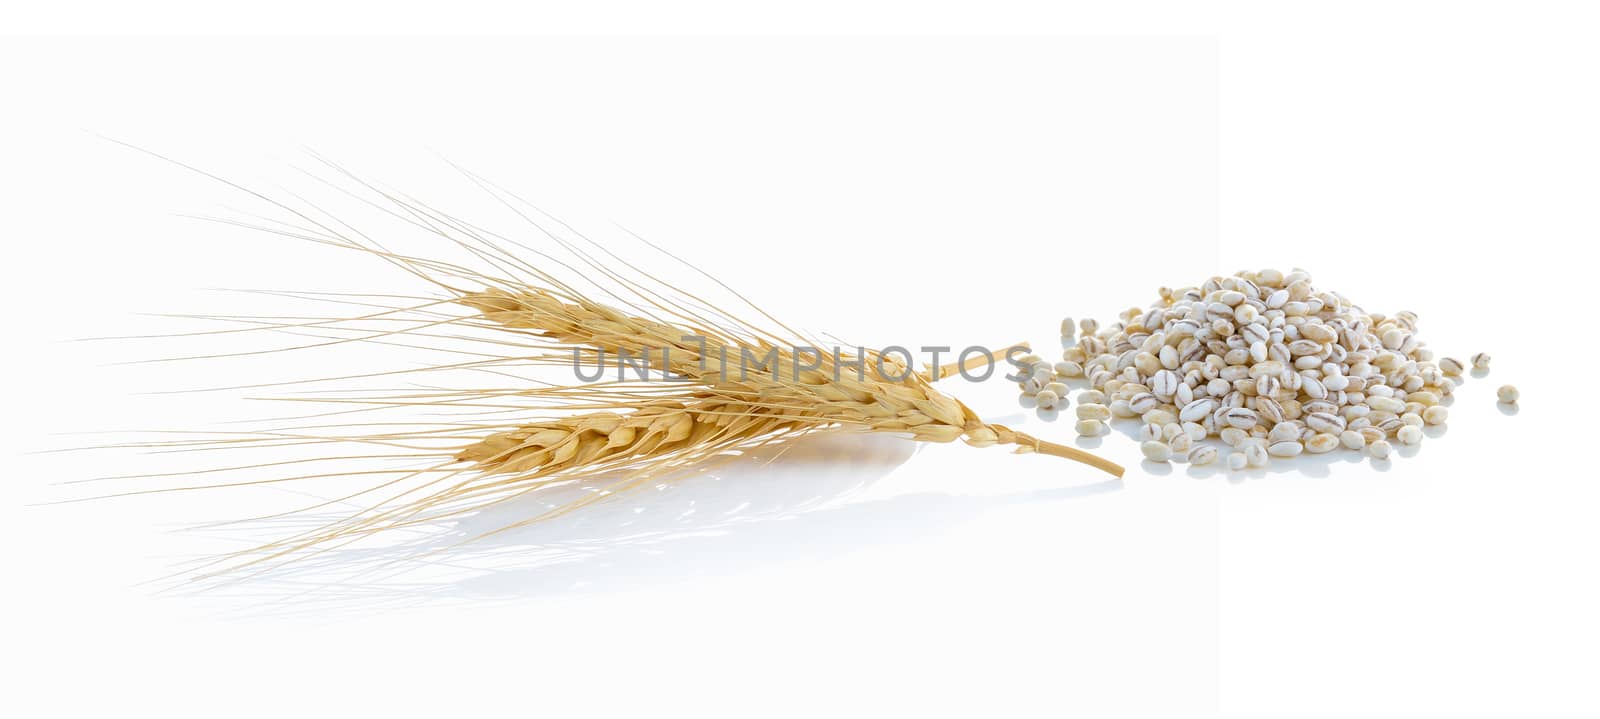  barley ear over a white background